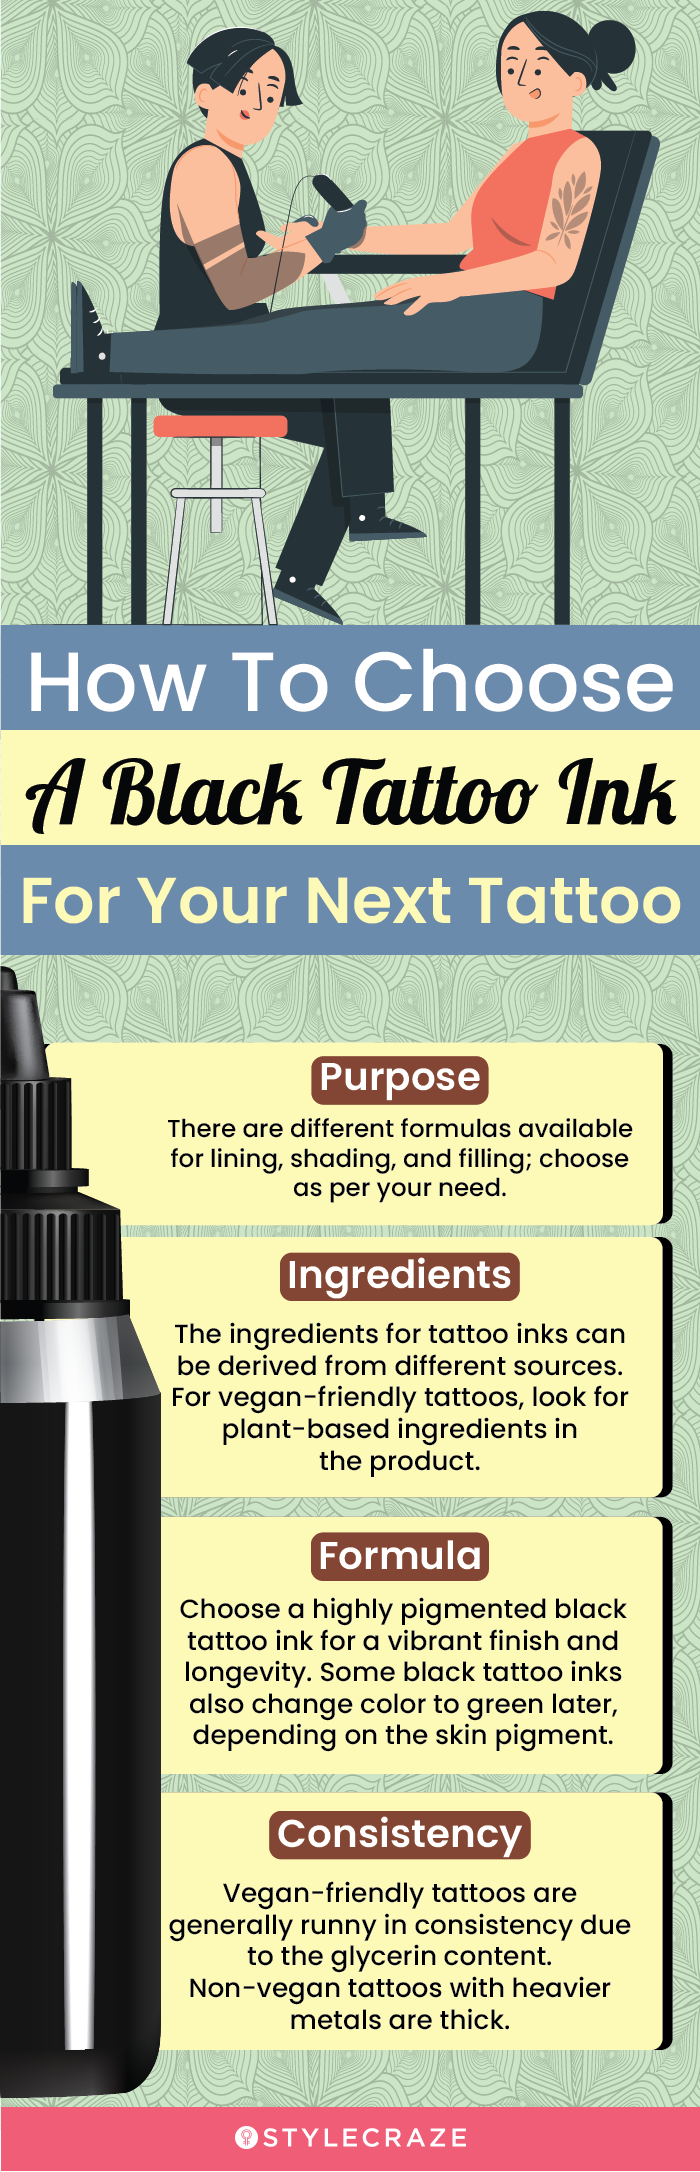 How To Choose A Black Tattoo Ink For Your Next Tattoo (infographic)